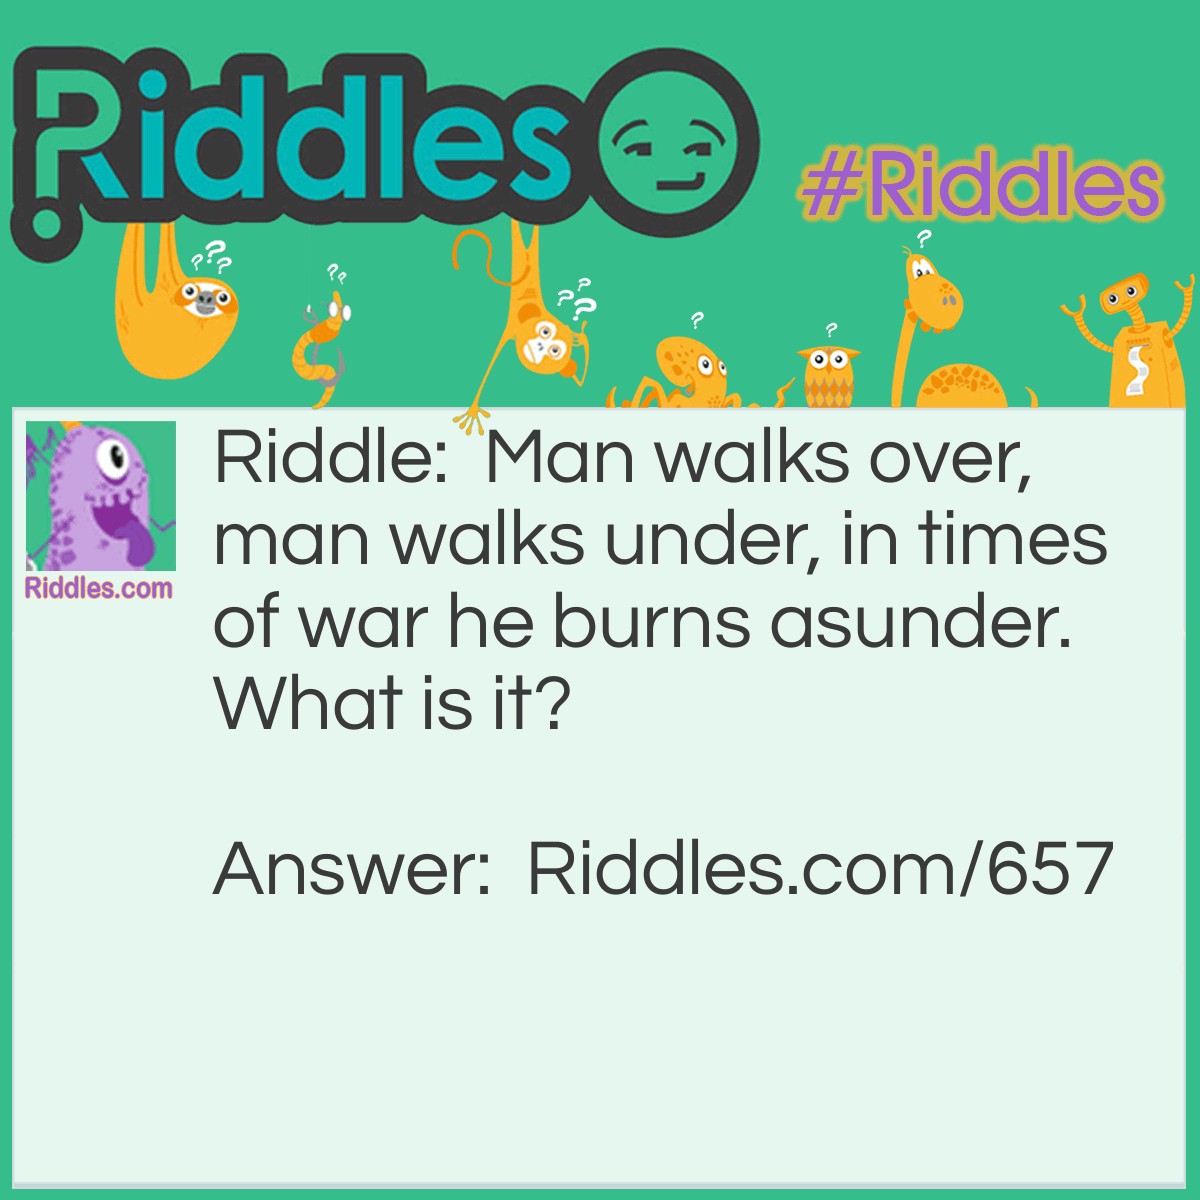 Riddle: Man walks over, man walks under, in times of war he burns asunder.
What is it? Answer: A Bridge.